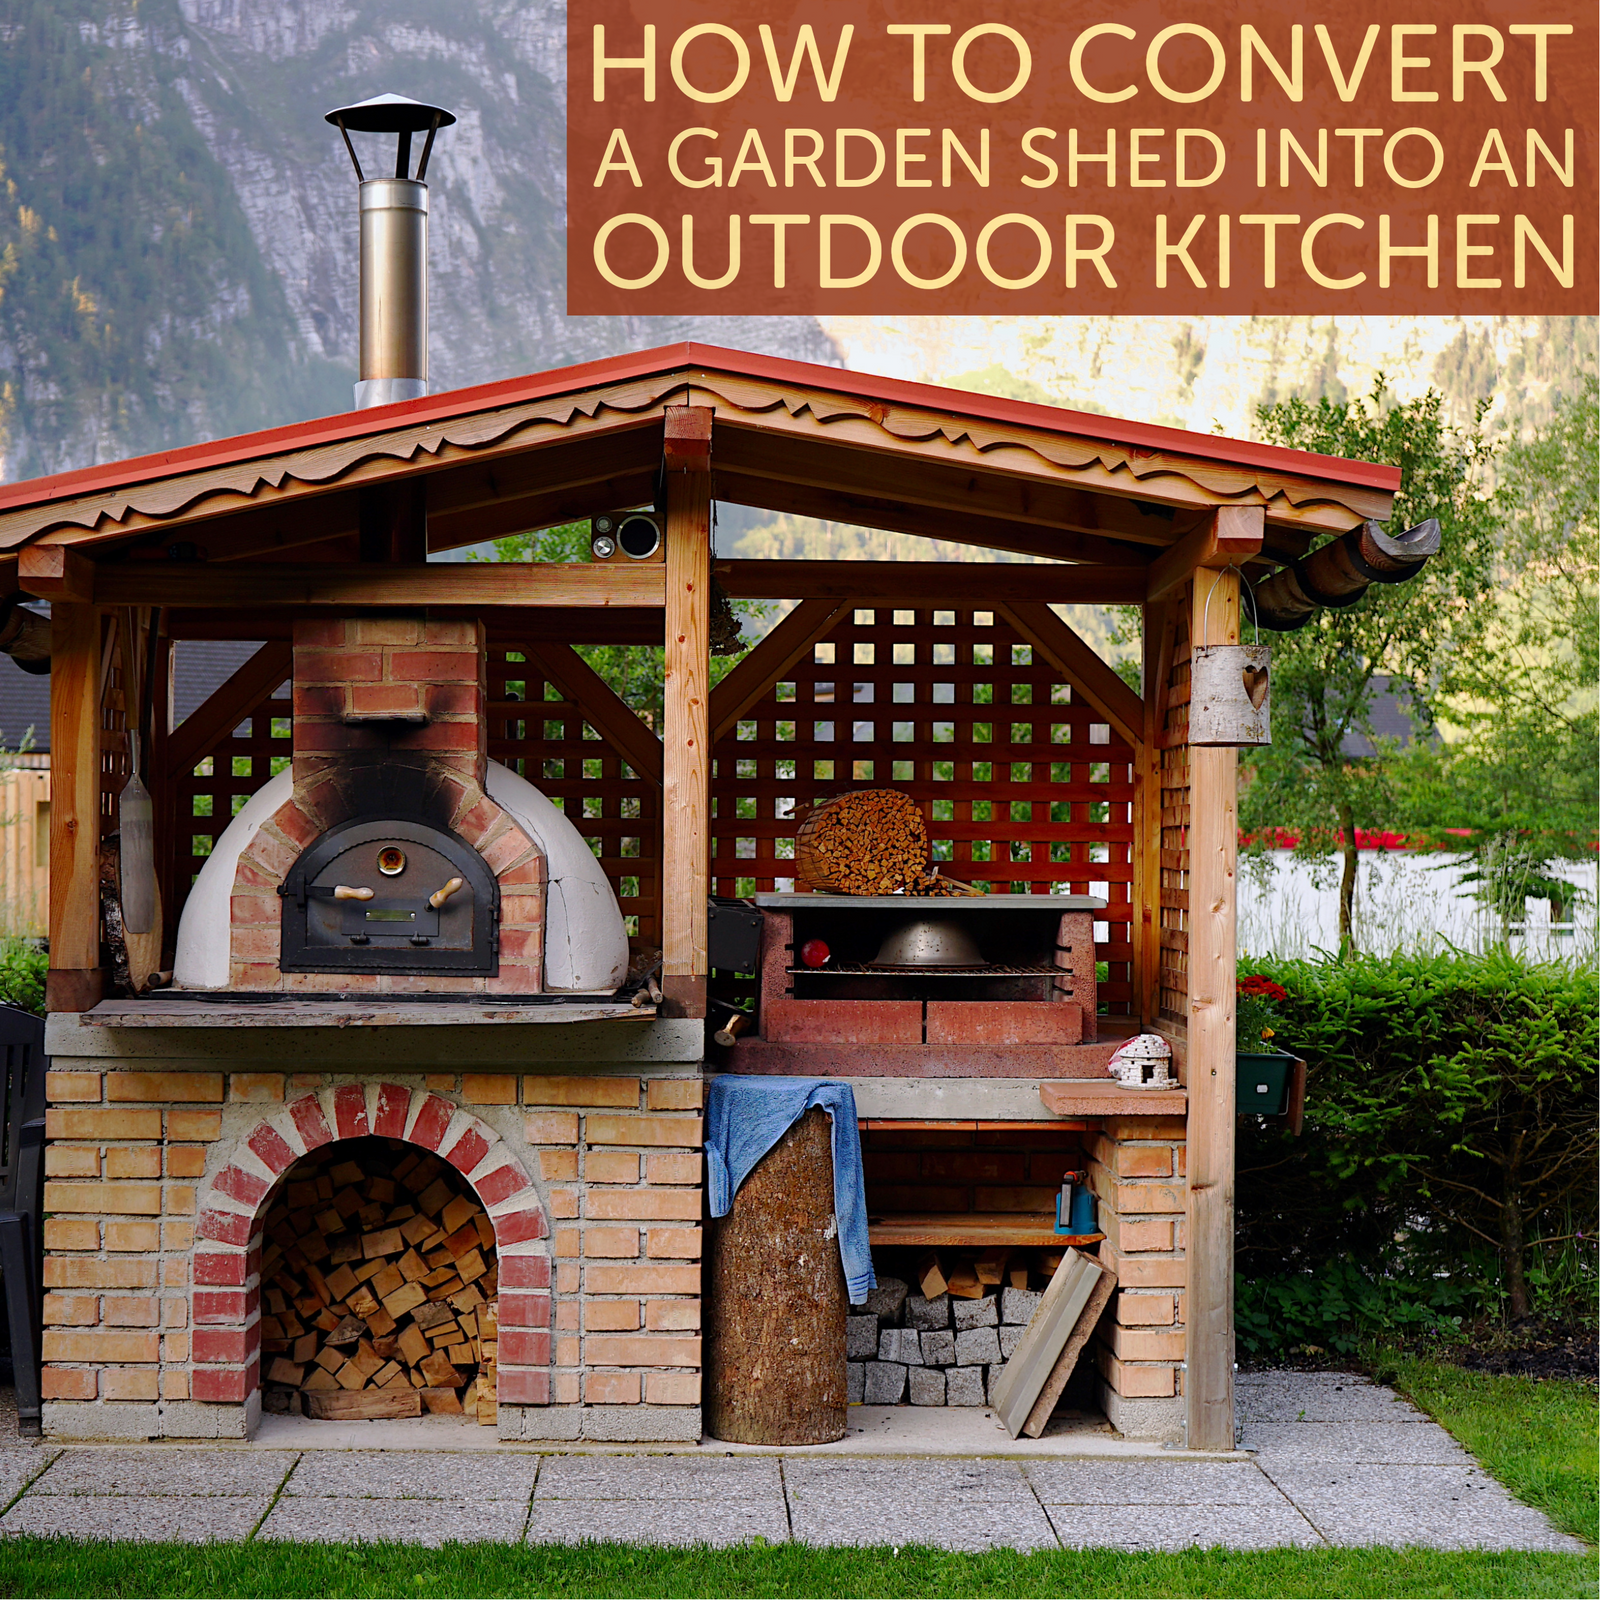 Pizza Oven Accessories For Your Wood-Fired Pizza Oven - Patio & Pizza  Outdoor Furnishings